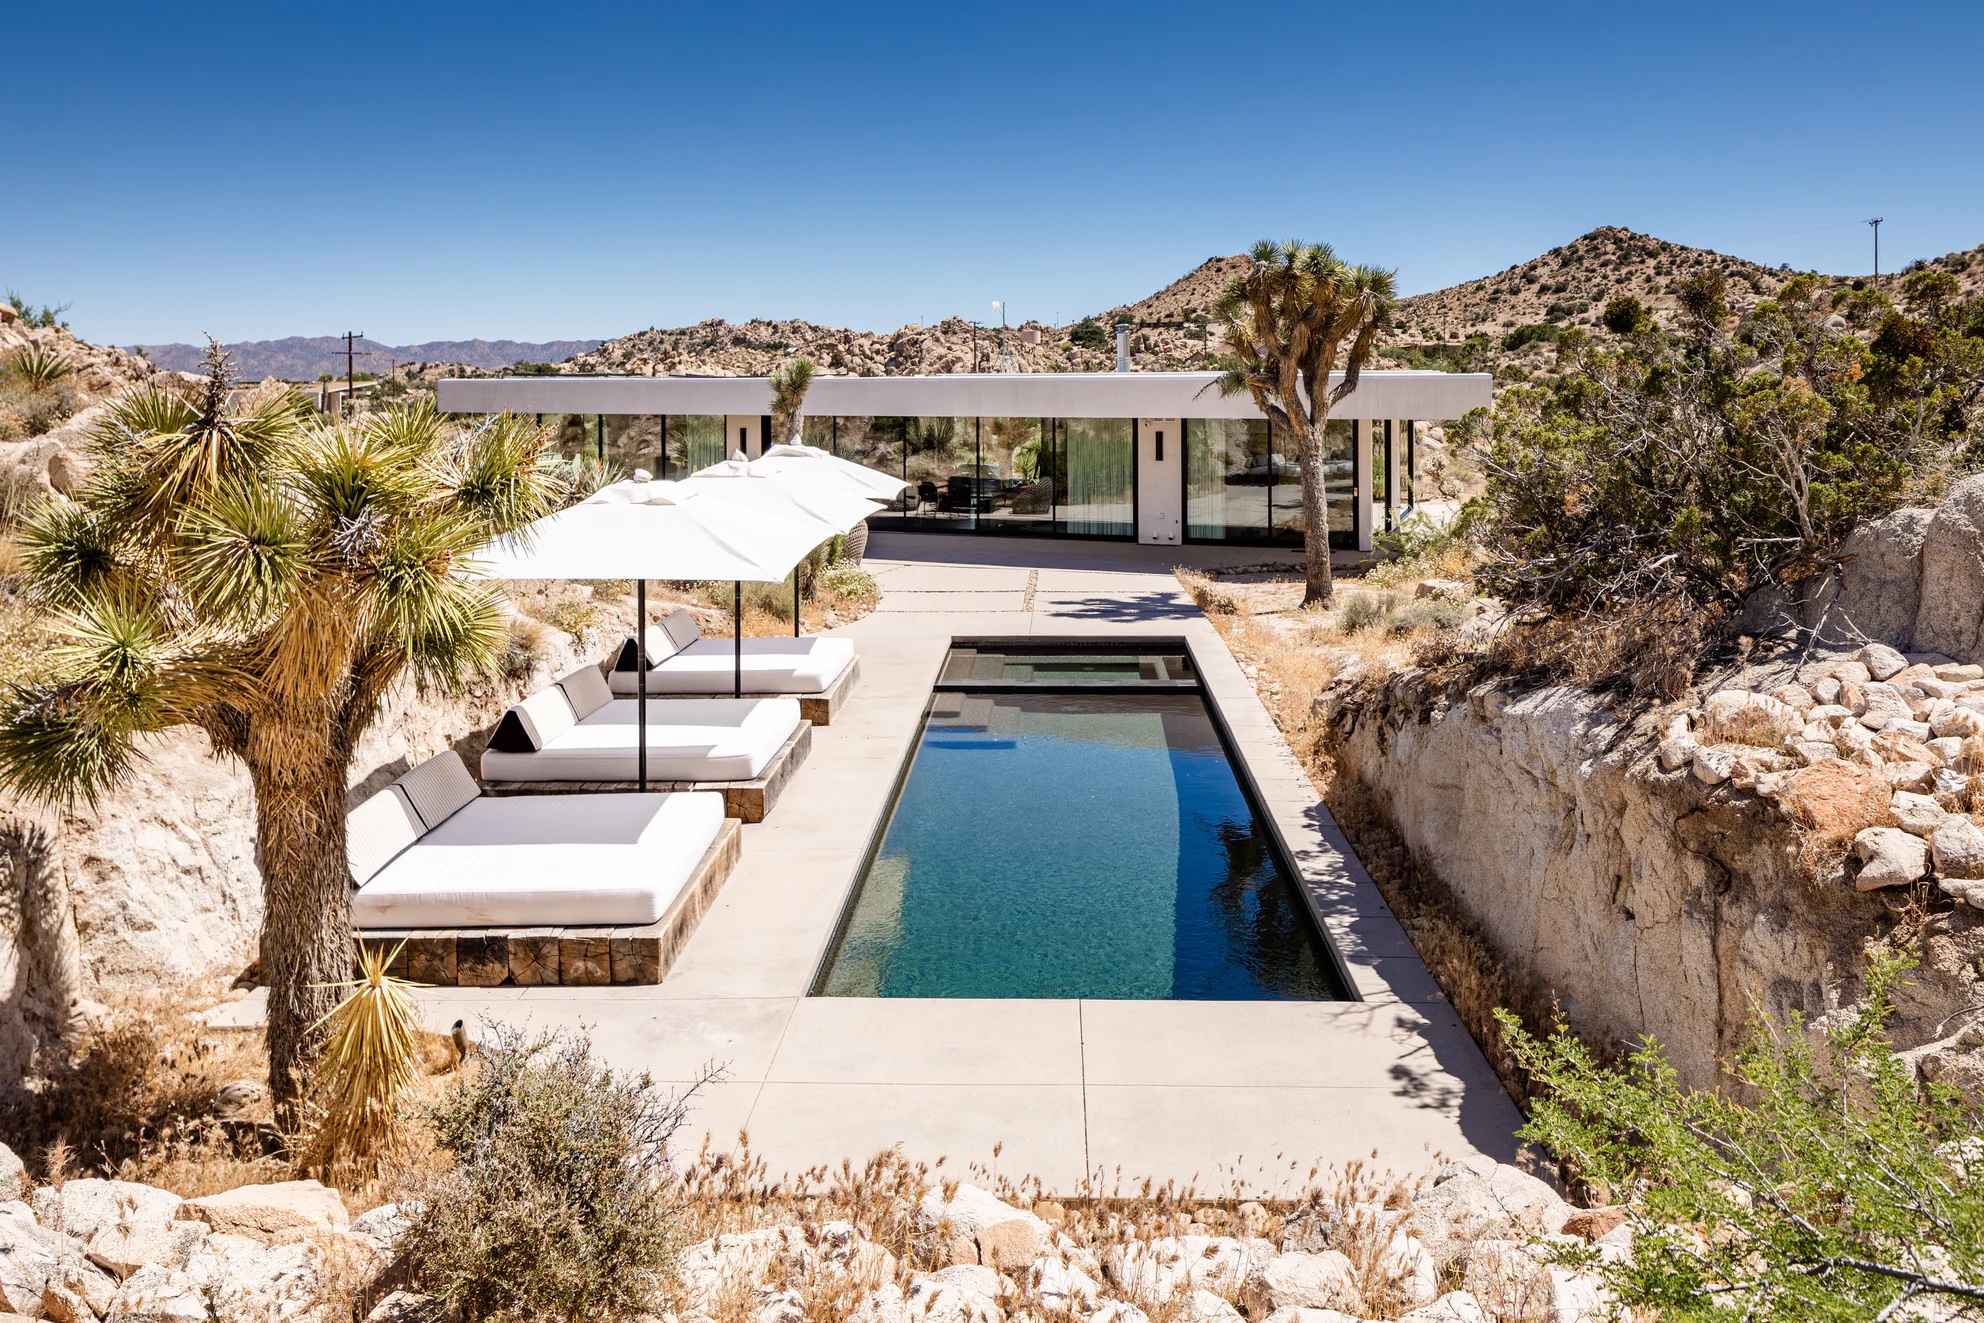 Poolside view of white loungers and umbrellas with a modern home in the backdrop at Desert Skies vacation home rental near Joshua Tree, California.